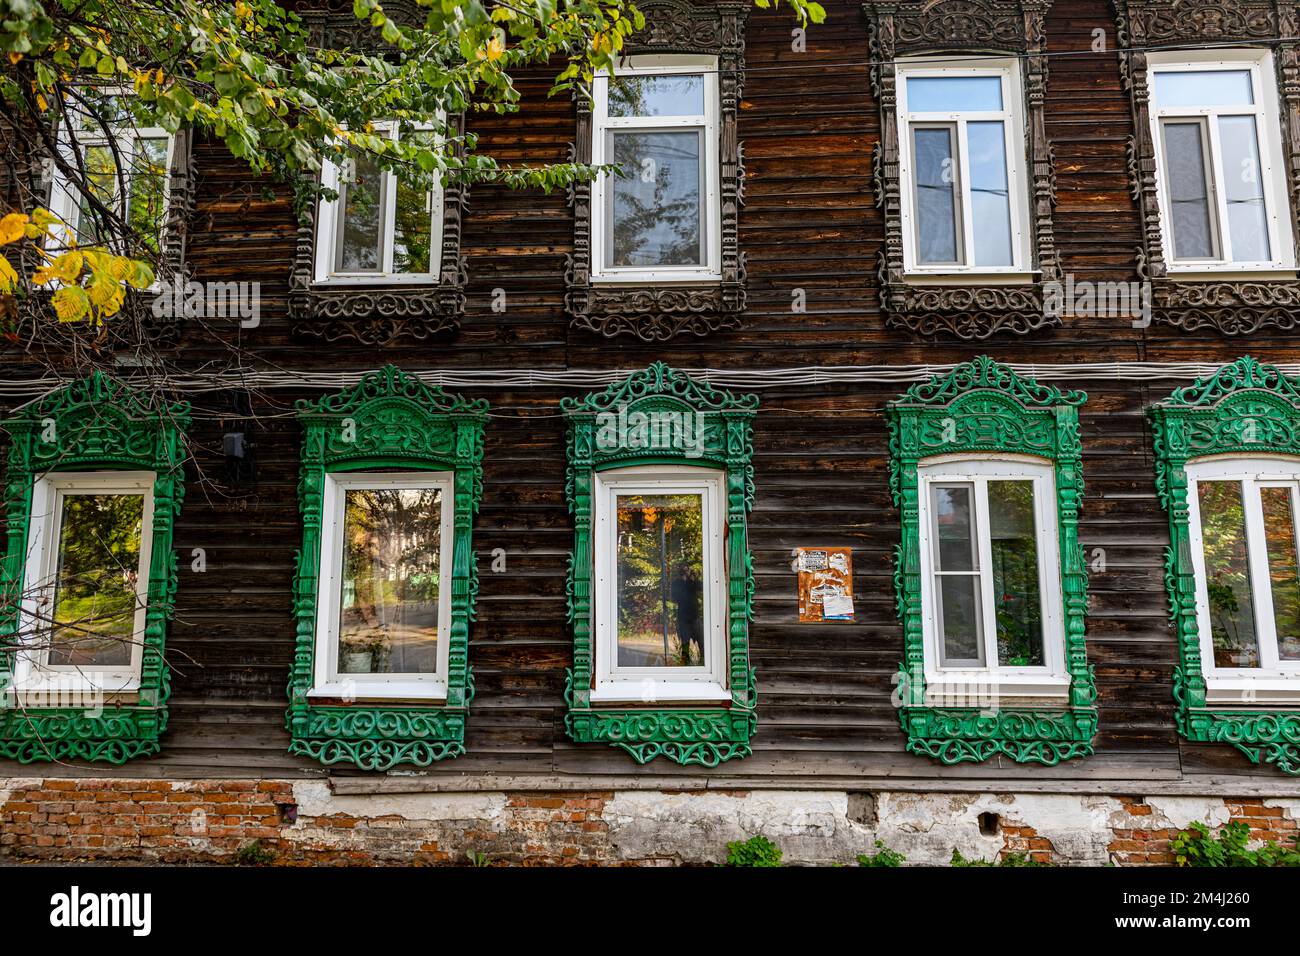 Detail woodwork, Old wooden house, Tomsk, Tomsk Oblast, Russia Stock Photo